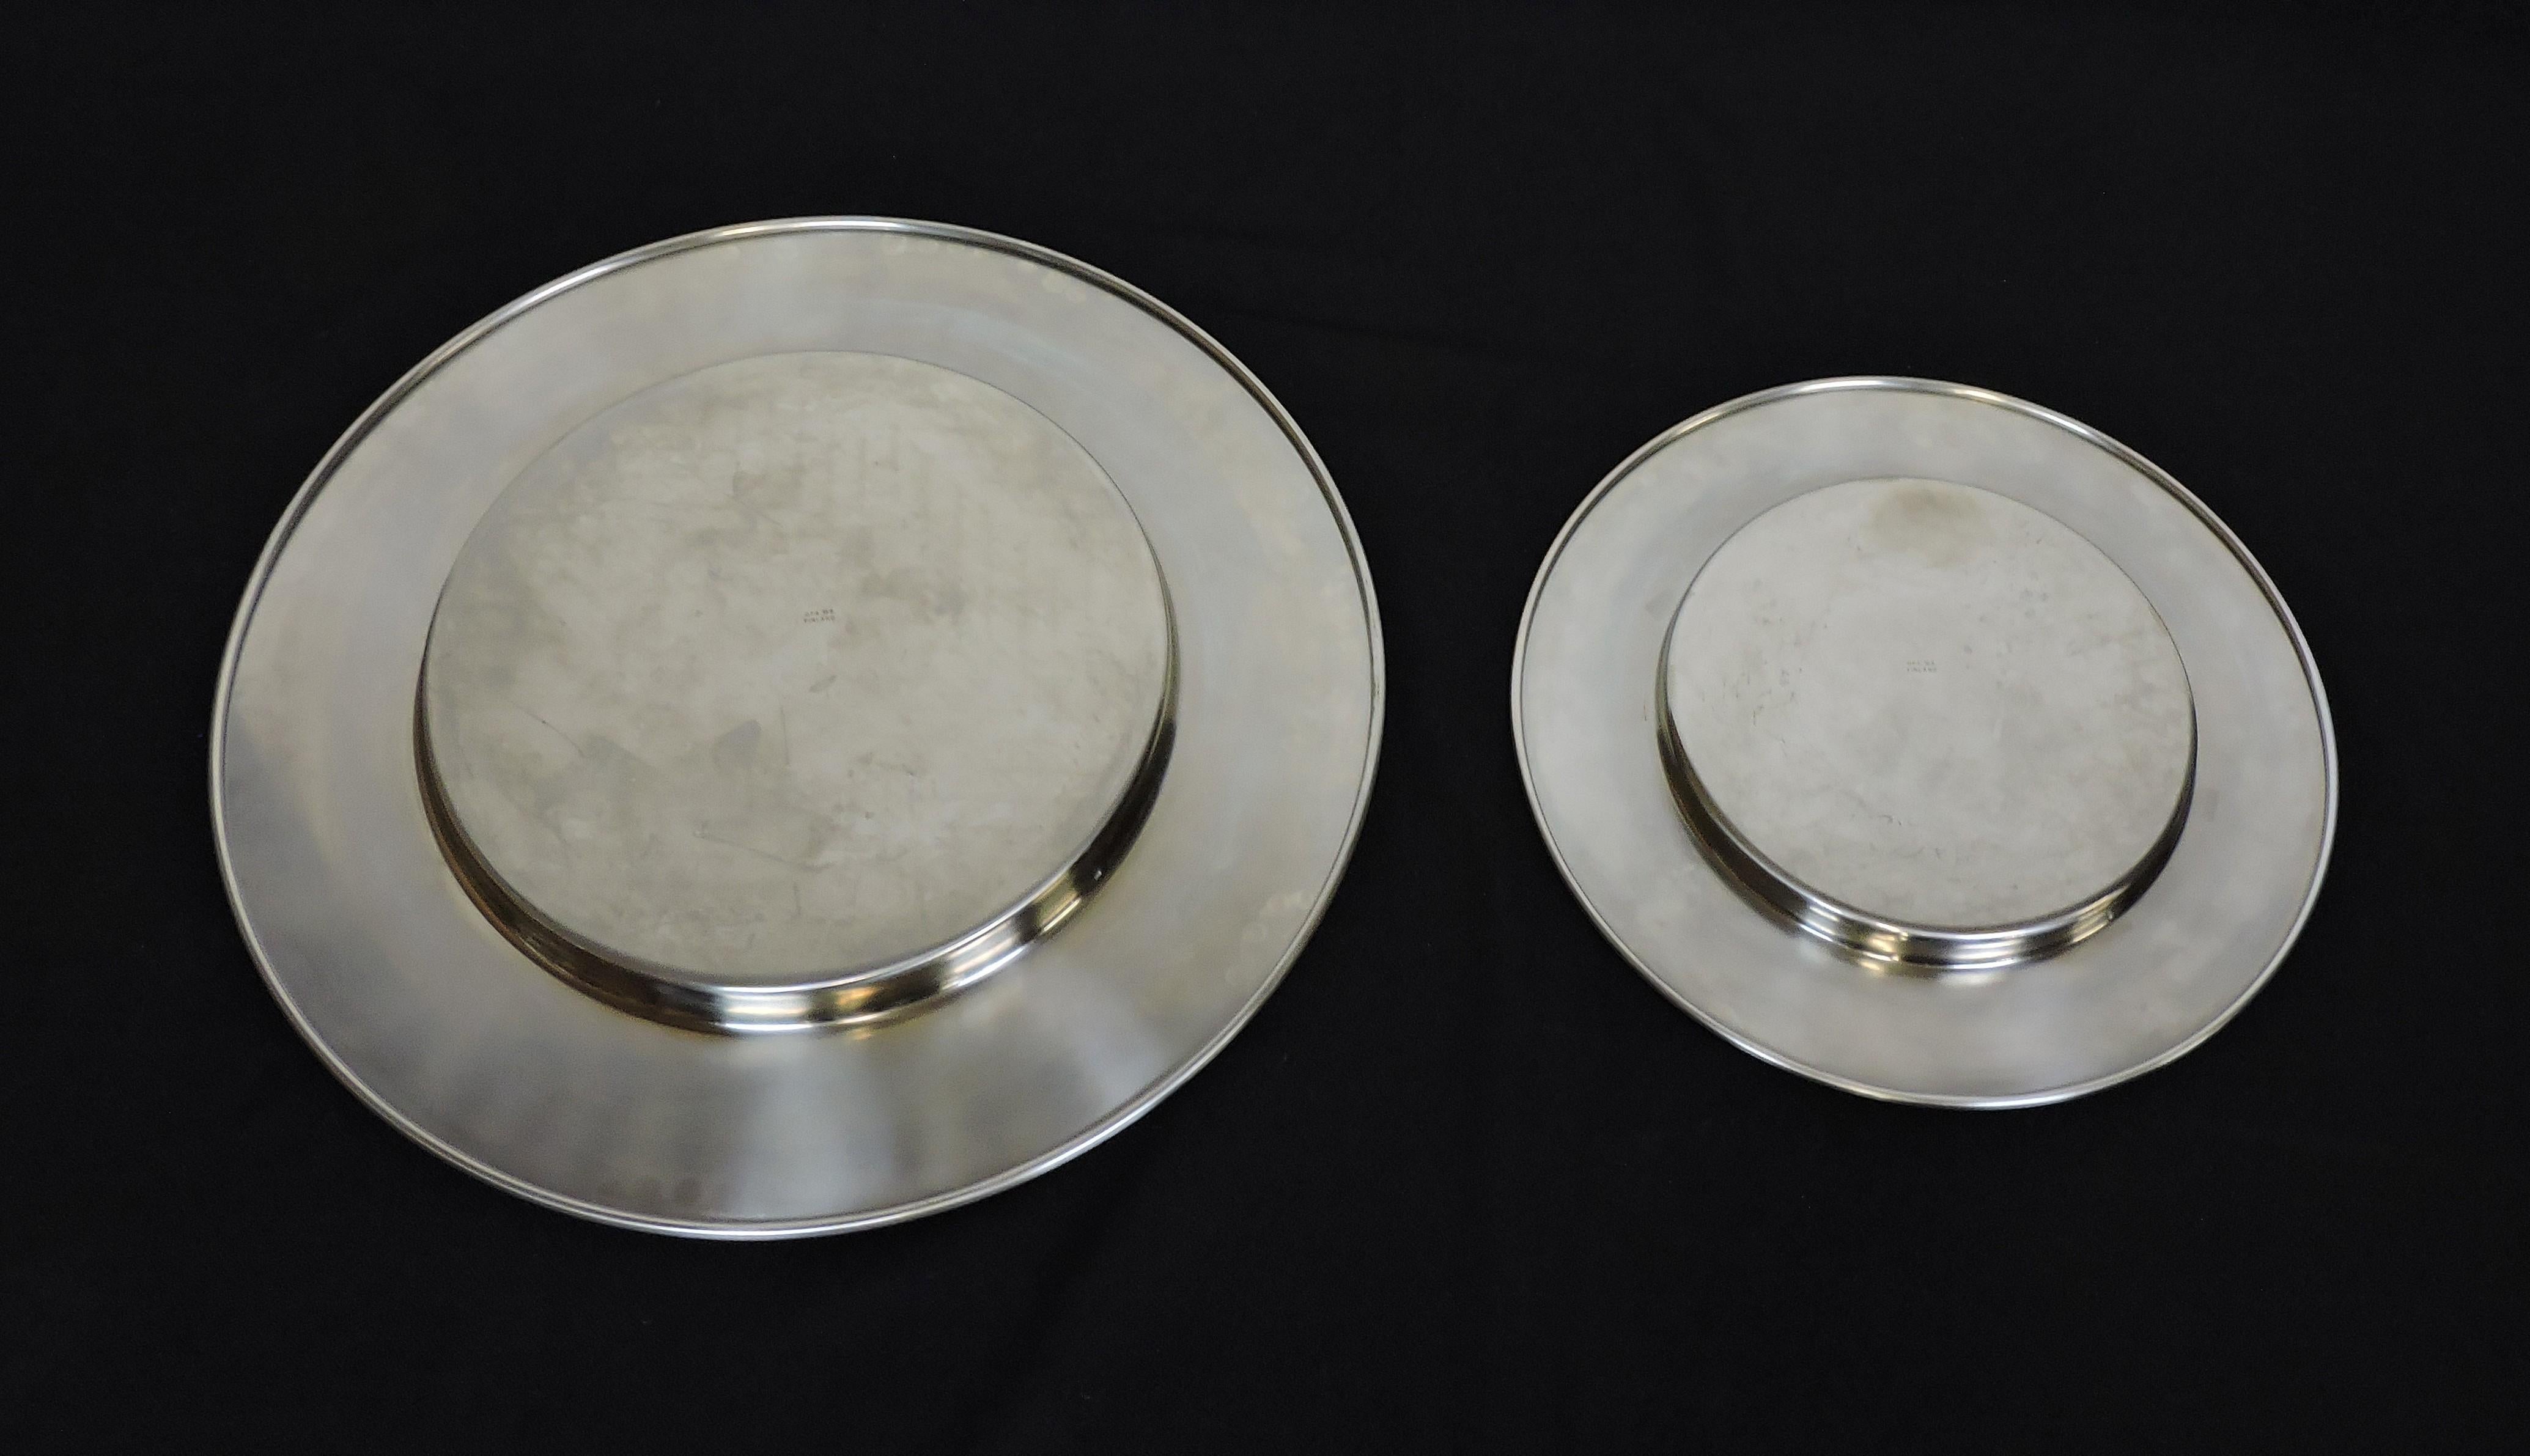 Hard to find set of two stainless steel platters designed by Timo Sarpaneva and made in Finland by OPA Ltd. Designed in 1970, the large platter is model TS-300-62 (62 cm), and the smaller platter is TS-300-44 (44 cm). The larger platter is